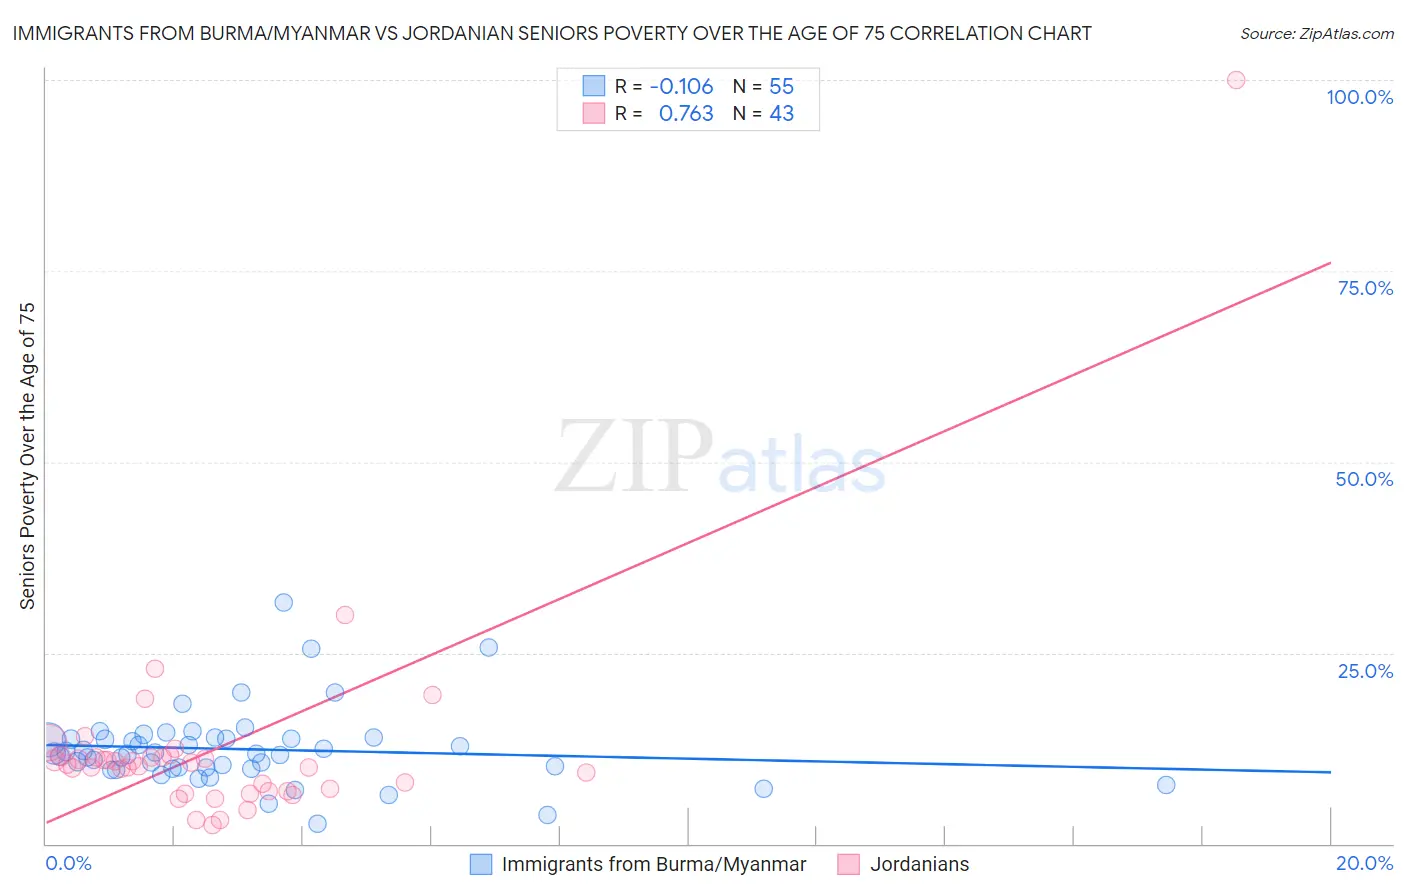 Immigrants from Burma/Myanmar vs Jordanian Seniors Poverty Over the Age of 75